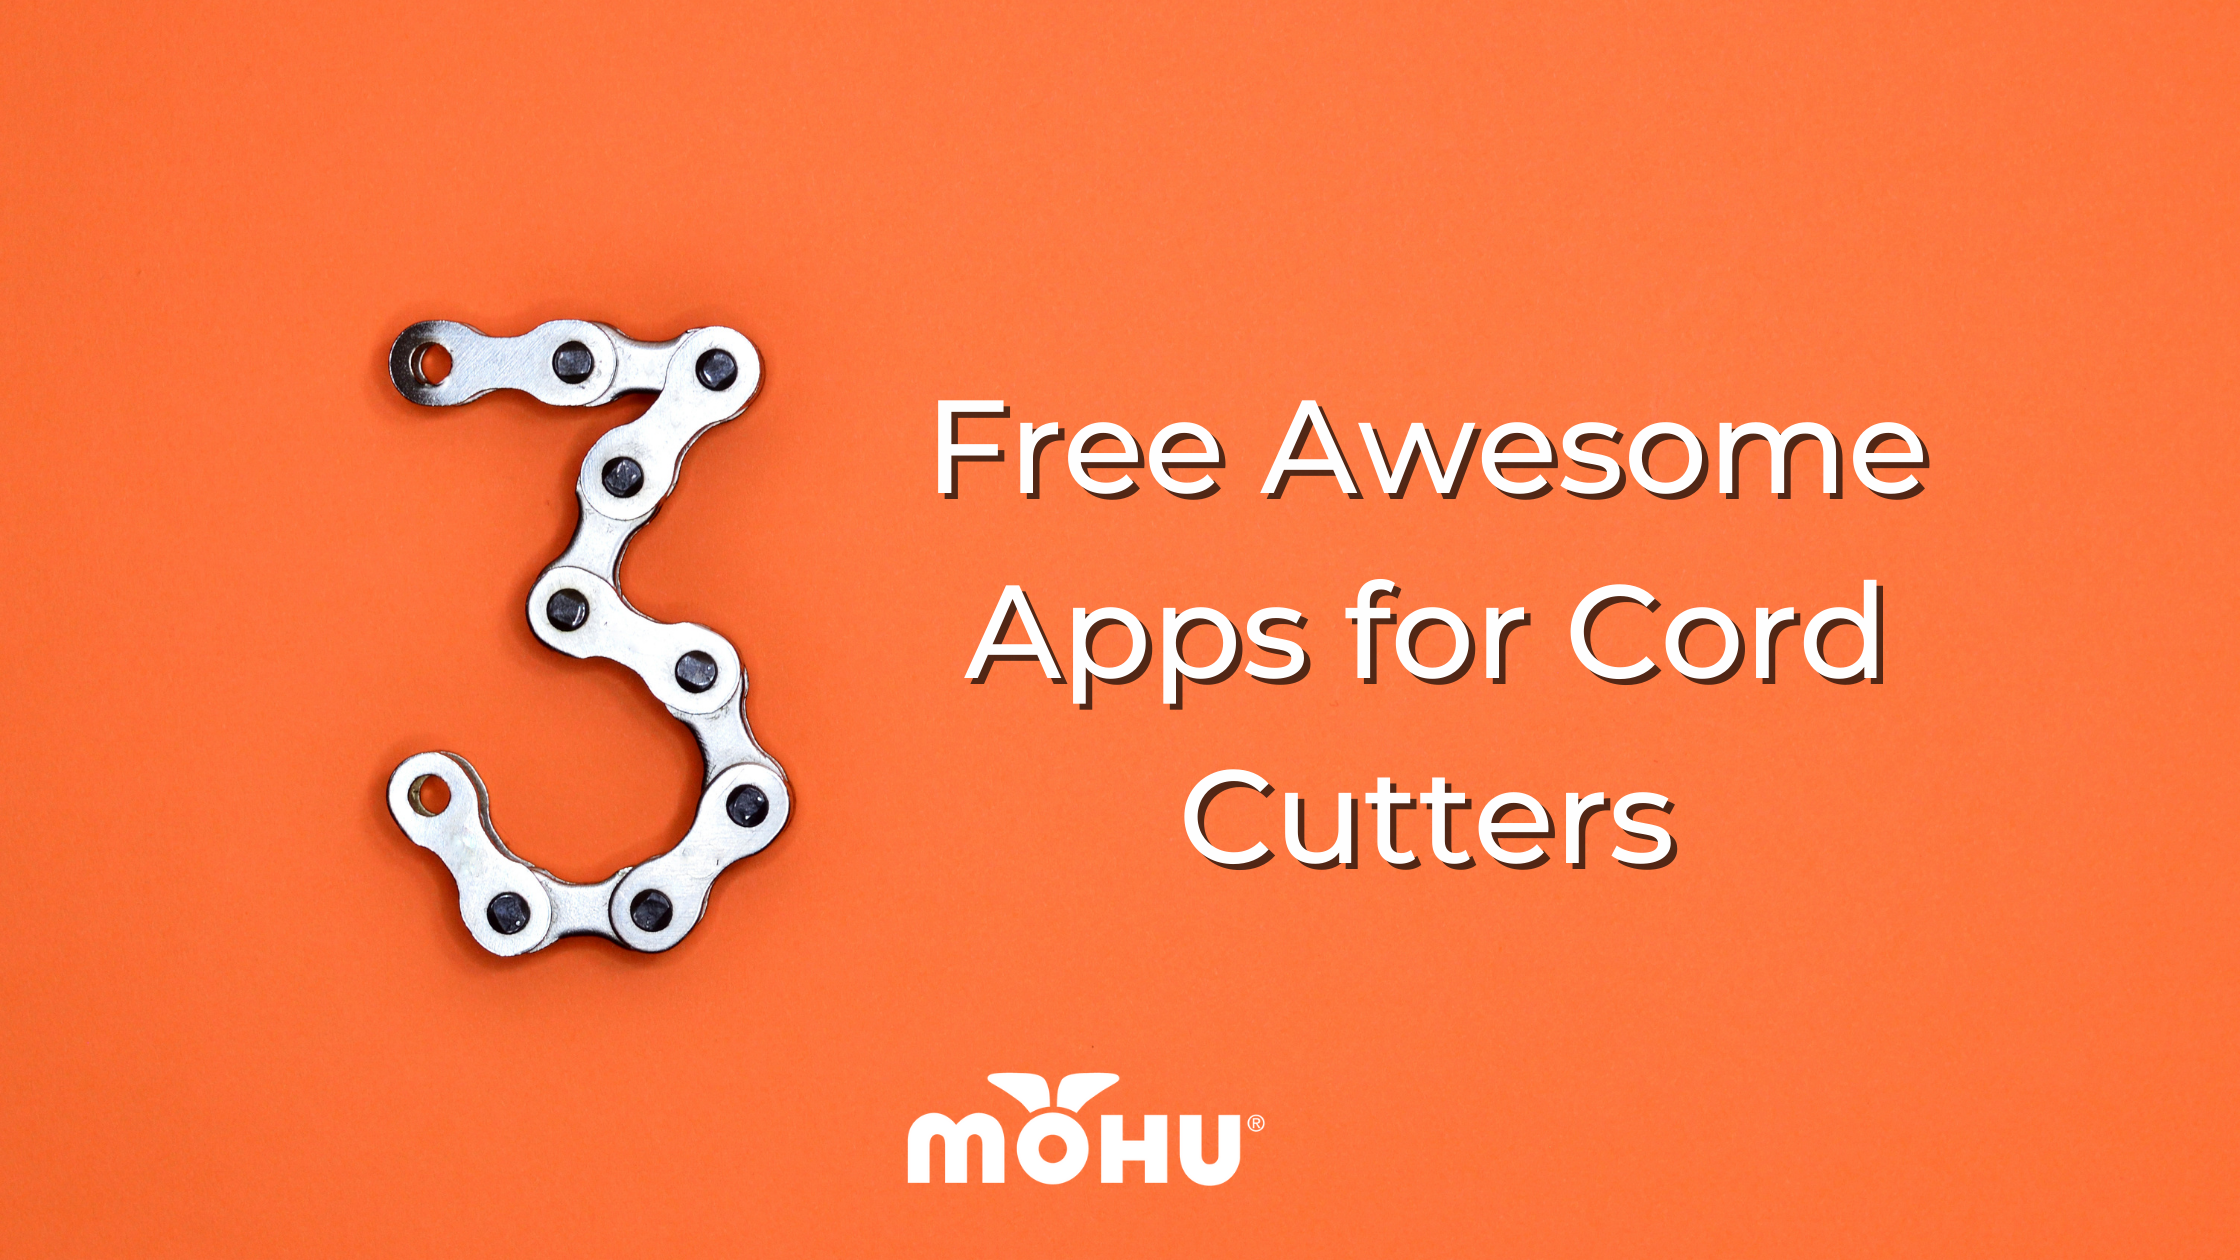 3 Free Awesome Apps for Cord Cutters, Mohu